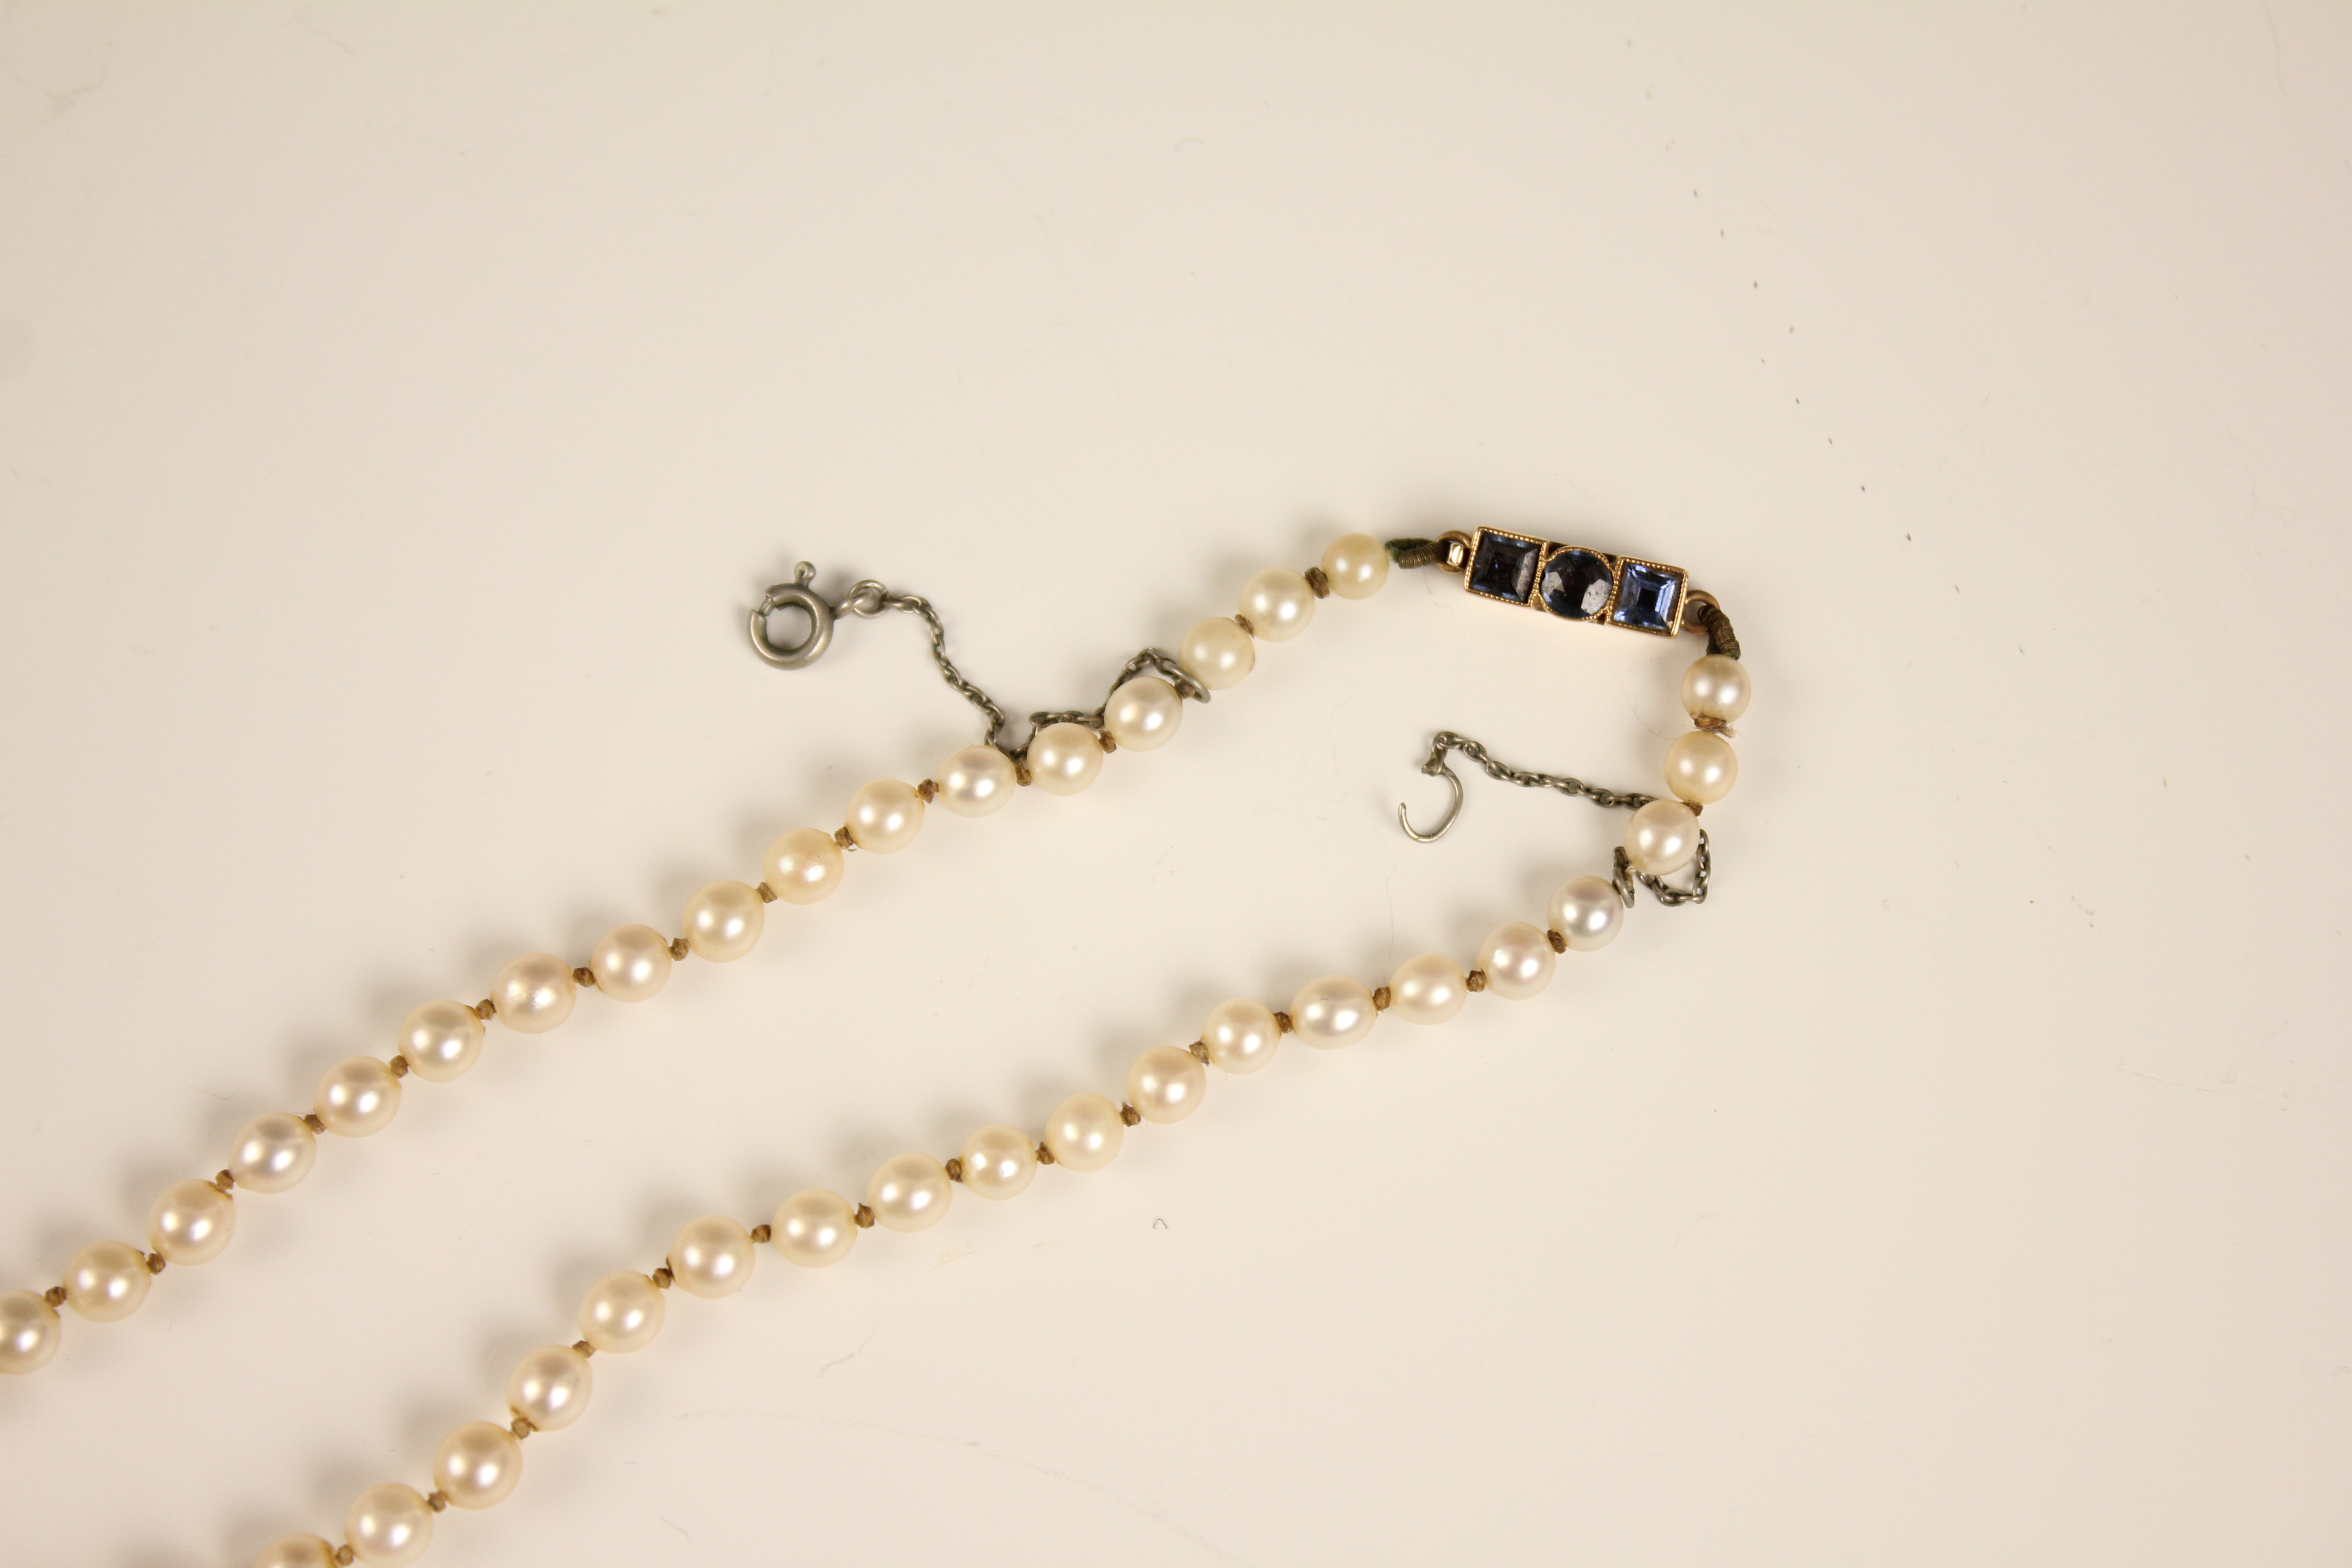 An early 20th century cultured pearl necklace, designed as a single row of round cultured pearls, - Image 9 of 12